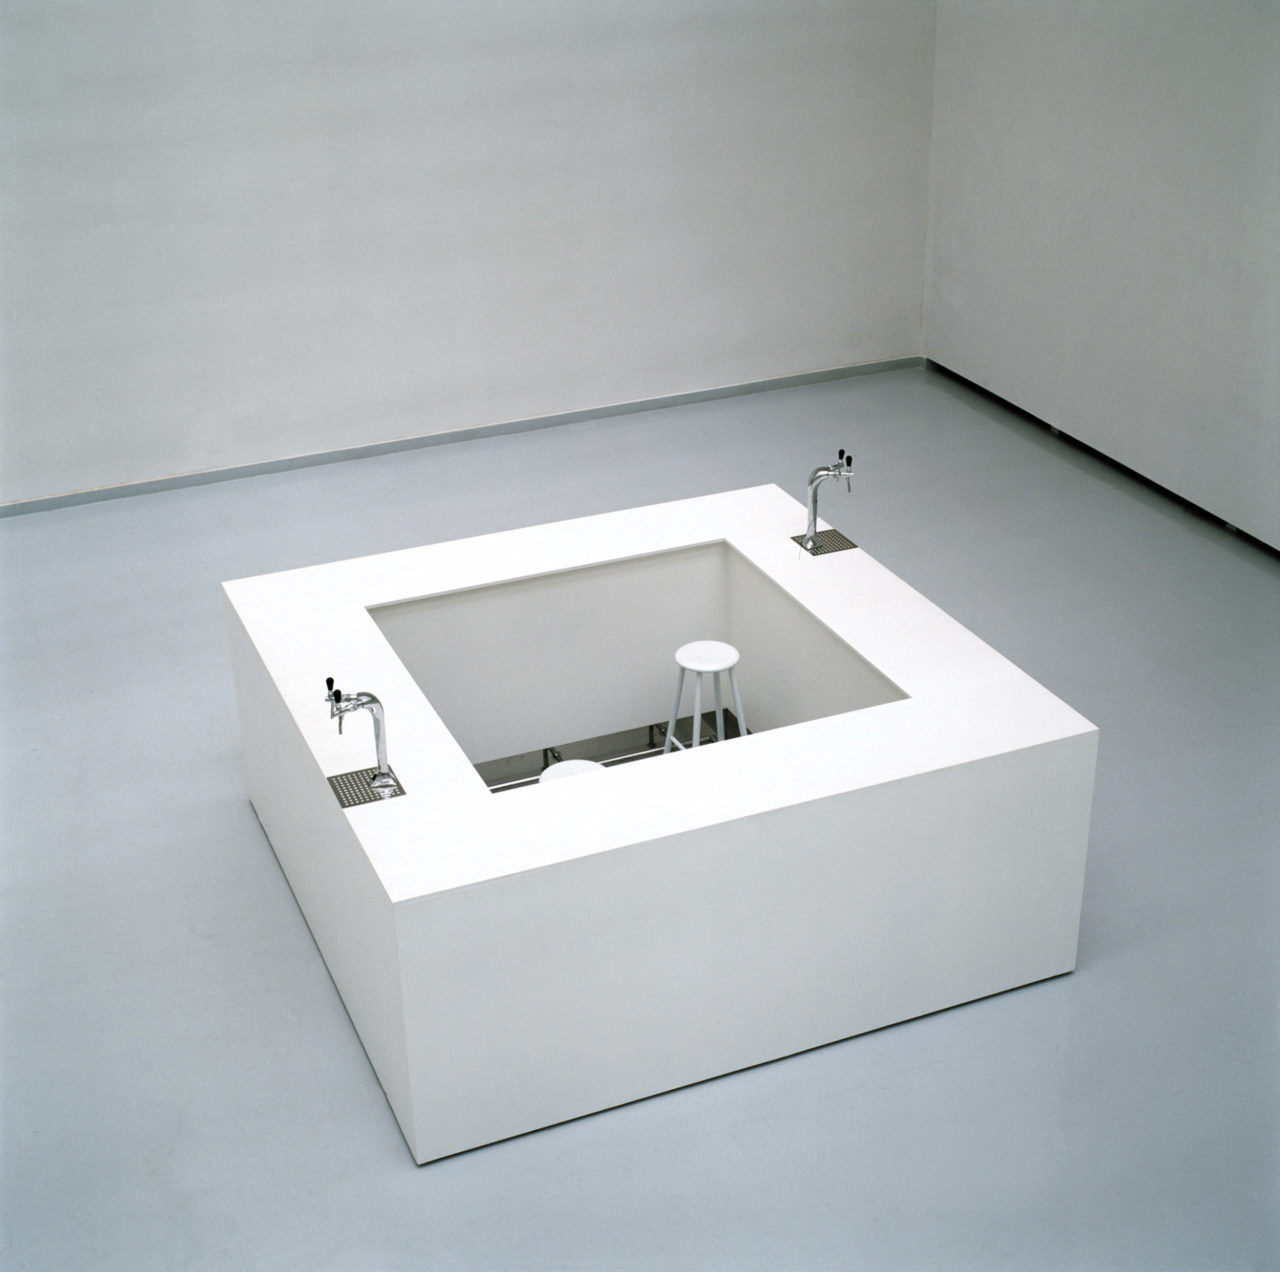 Elmgreen & Dragset | Powerless Structure, fig. 21 (Queer Bar), 1998